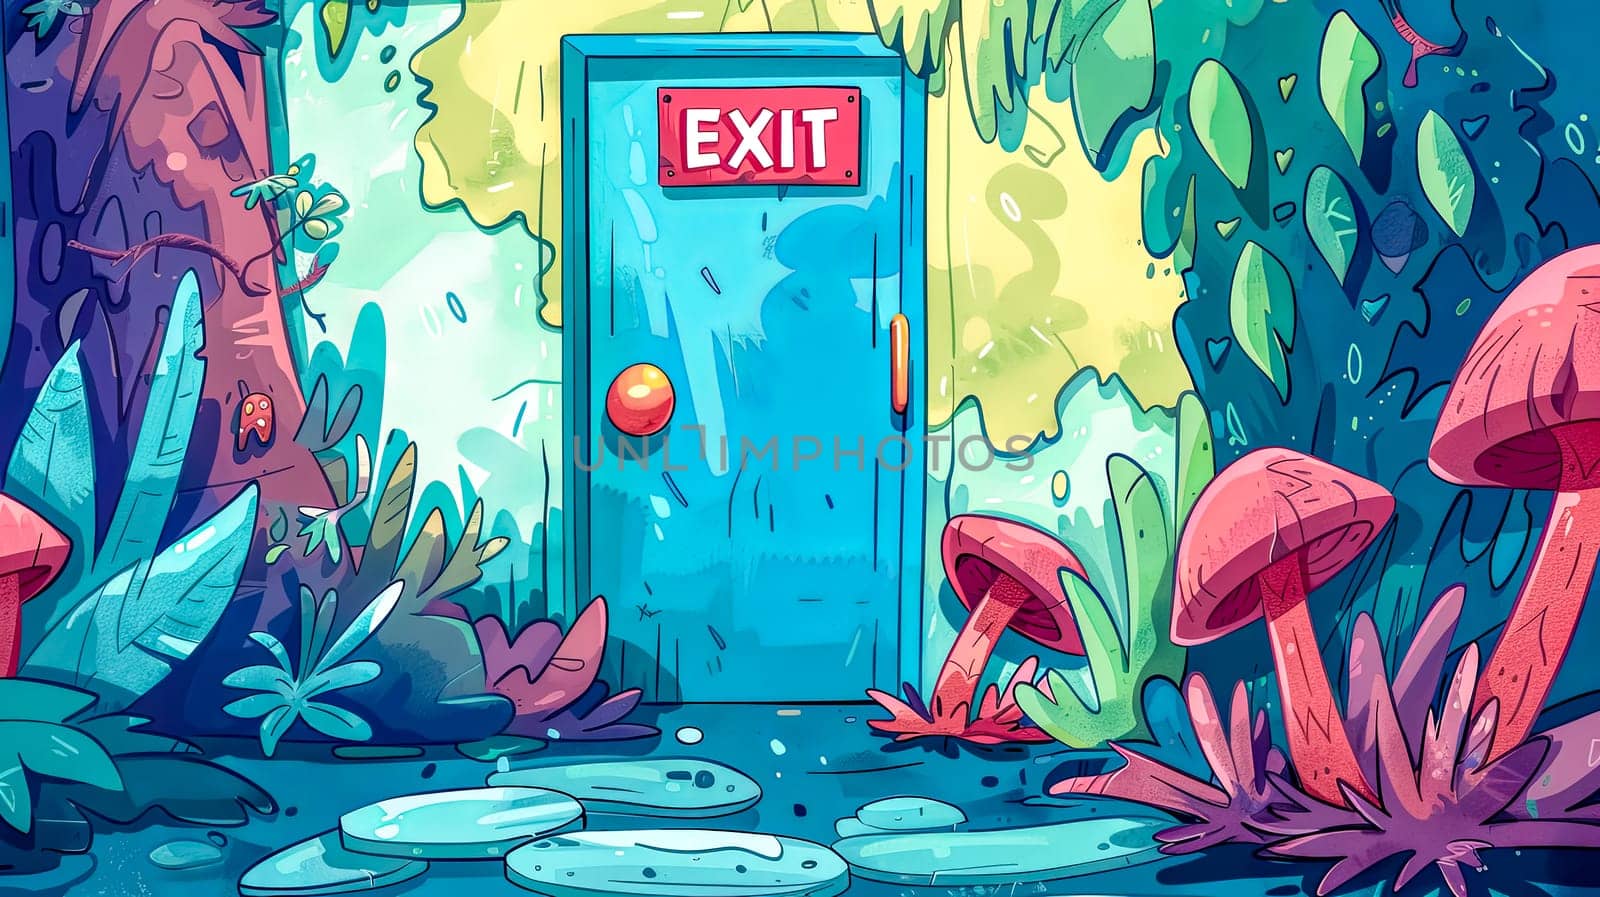 Enchanted forest exit concept illustration by Edophoto